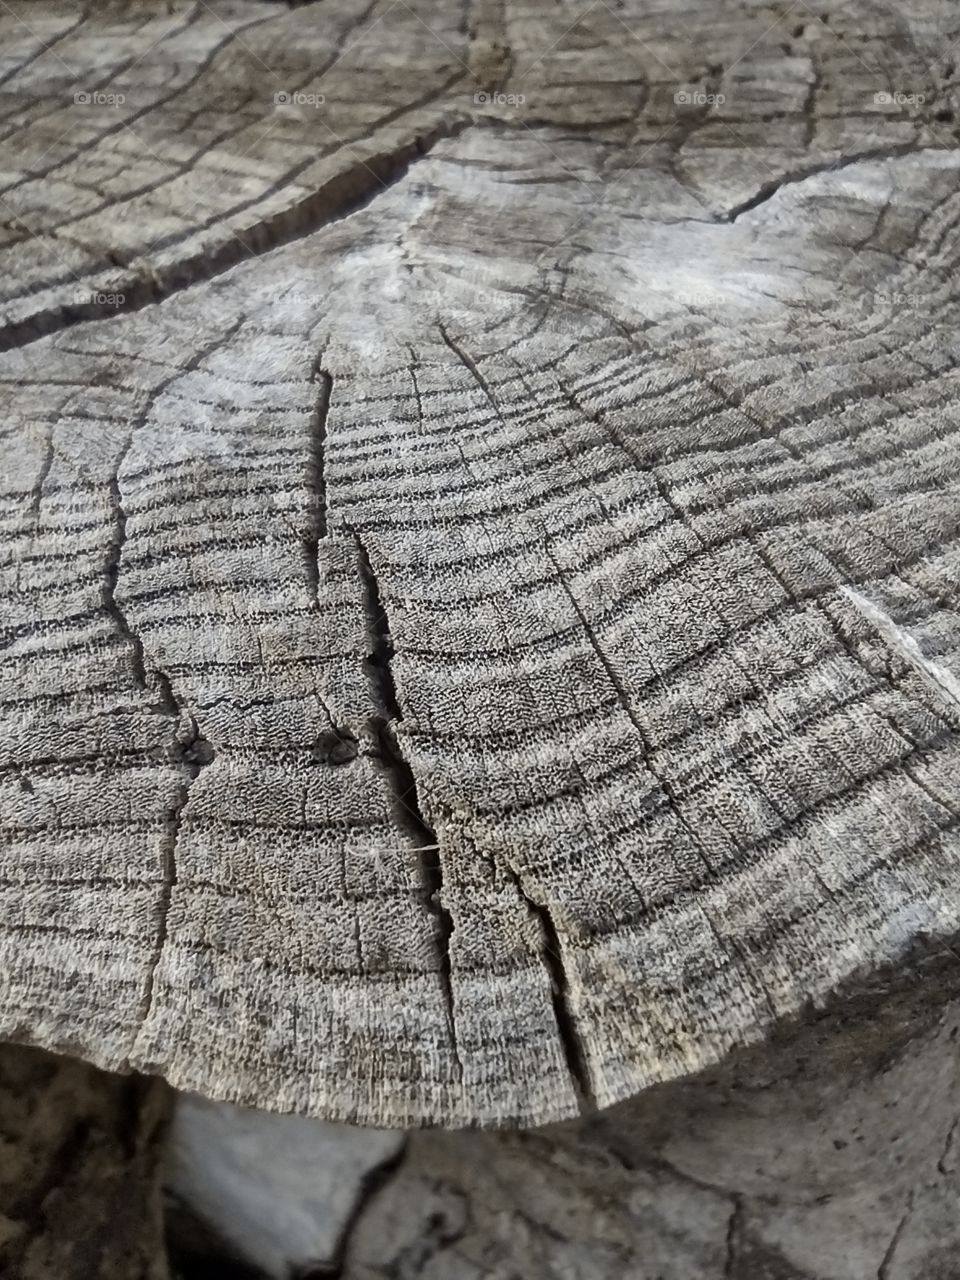 Unfiltered, lovely close-up of a beautifully aged tree stump in autumn